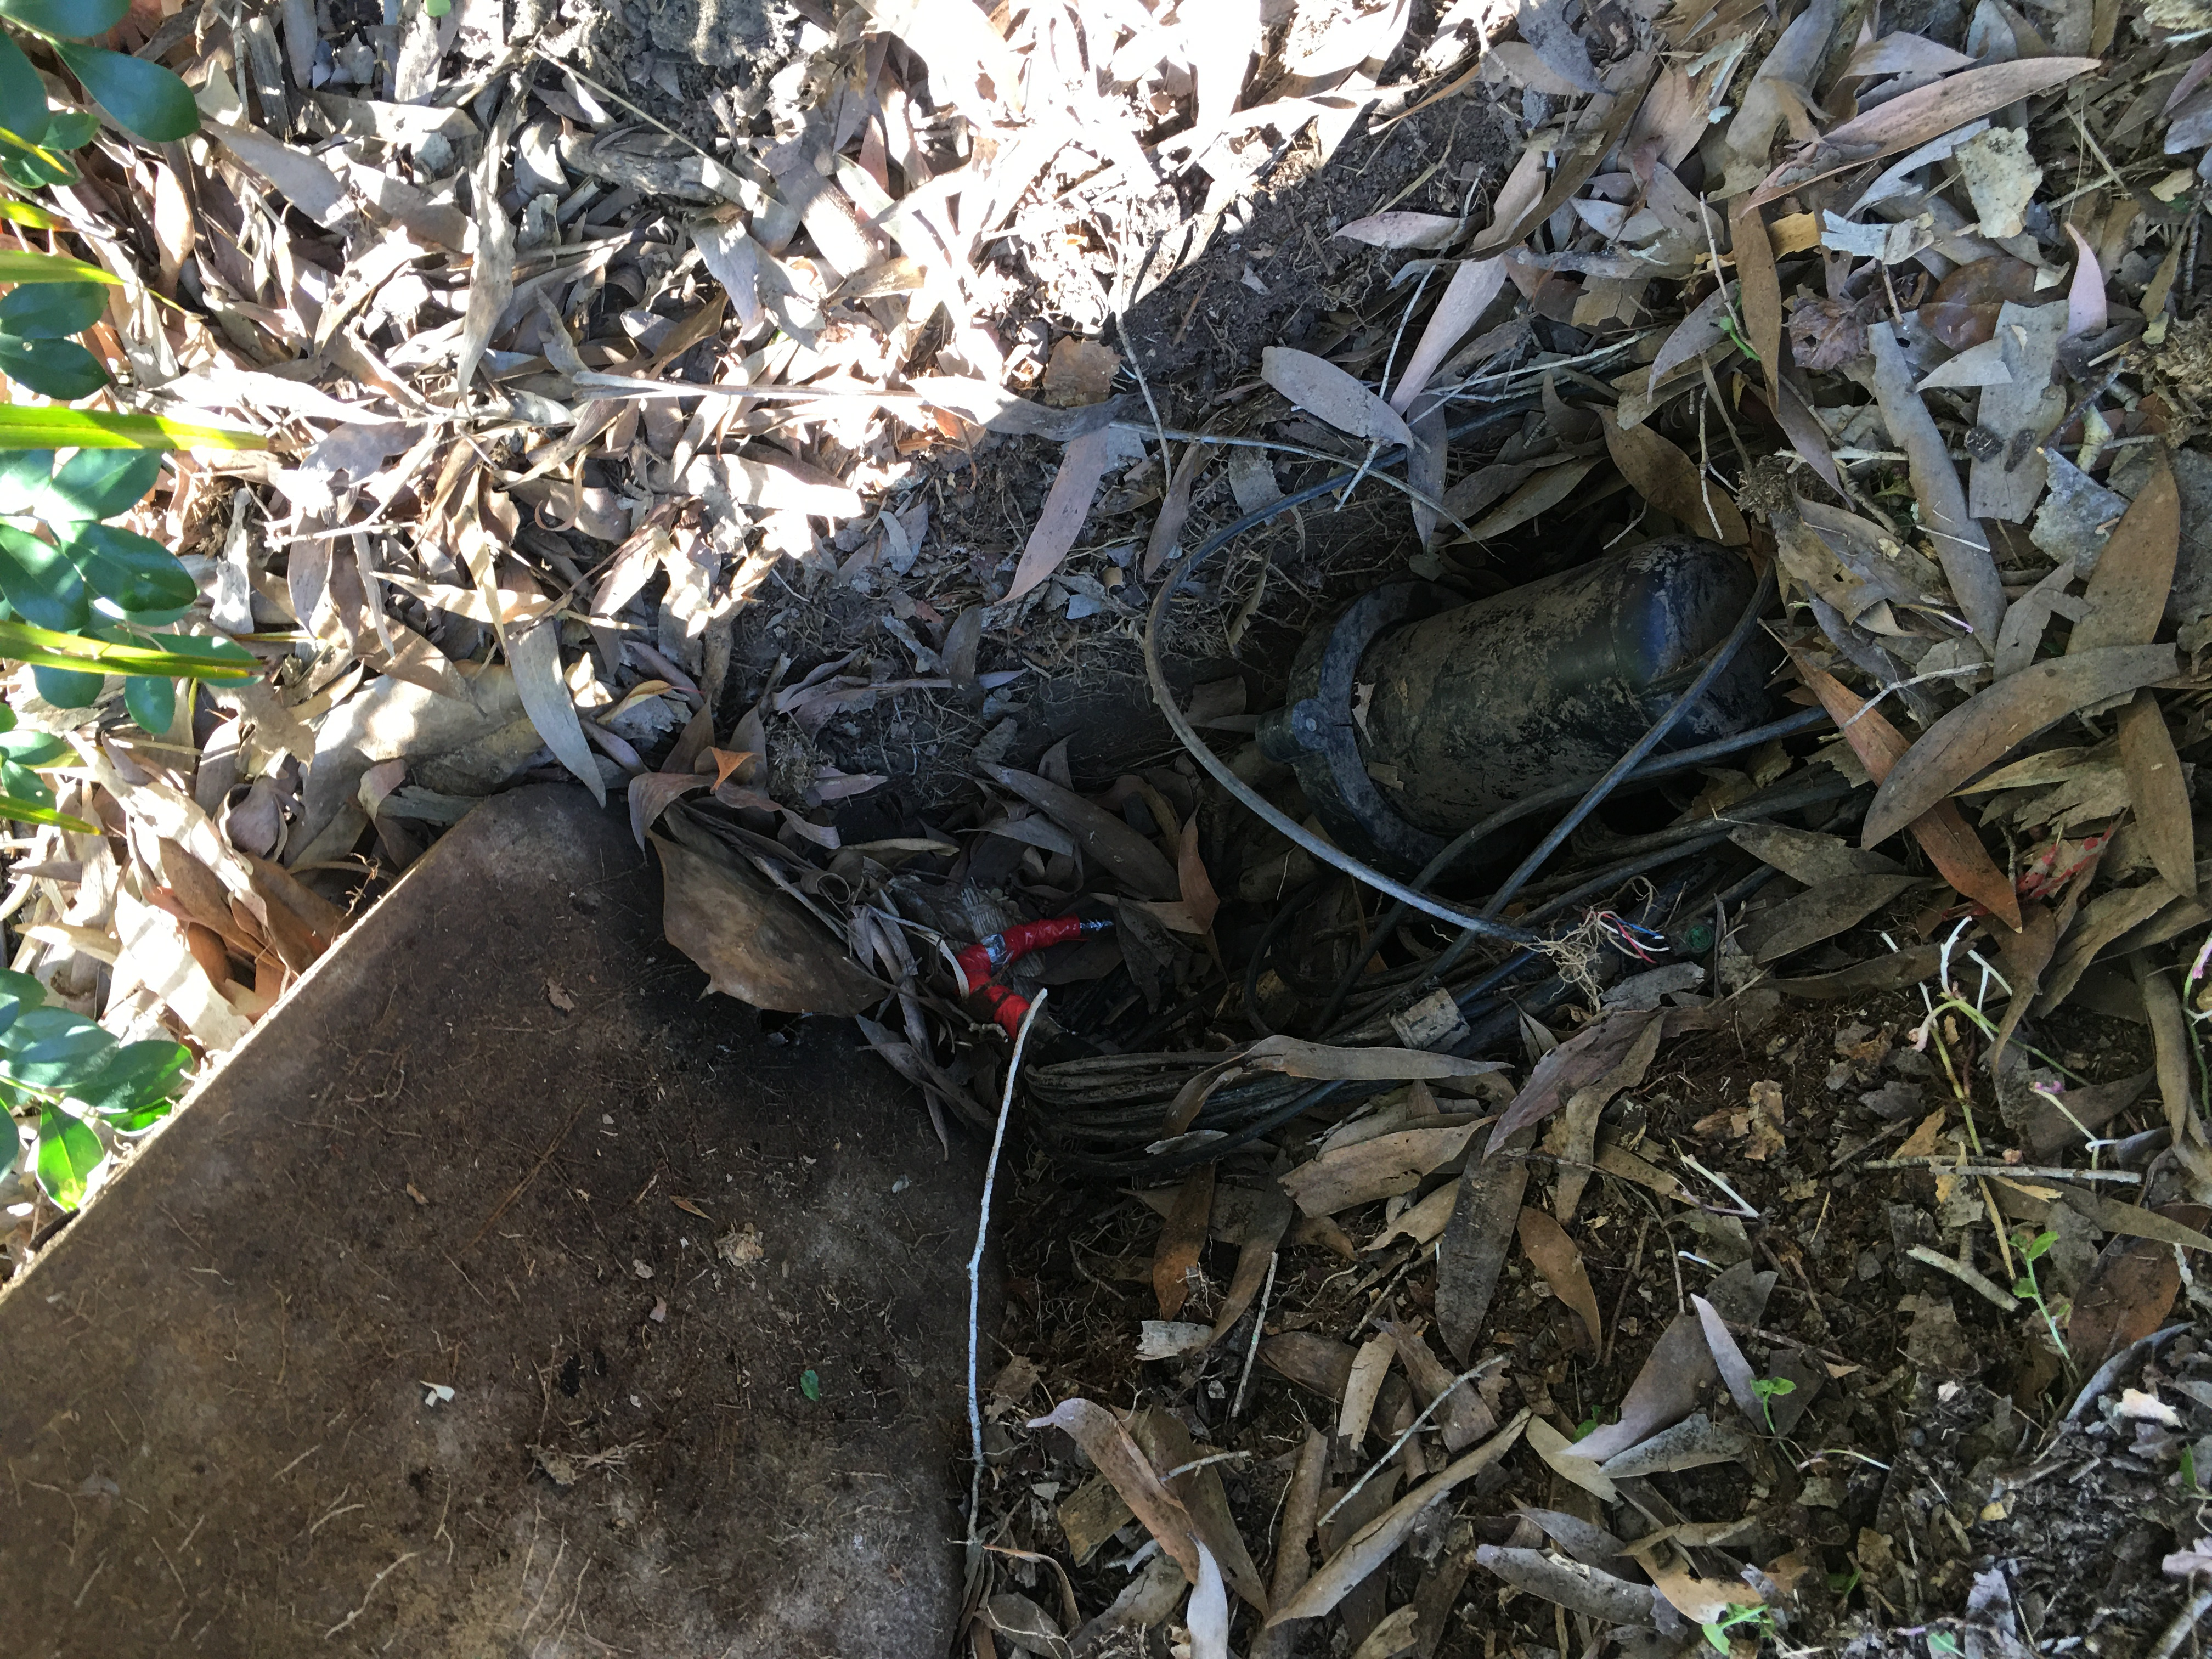 State of the NBN Pits before the upgrade